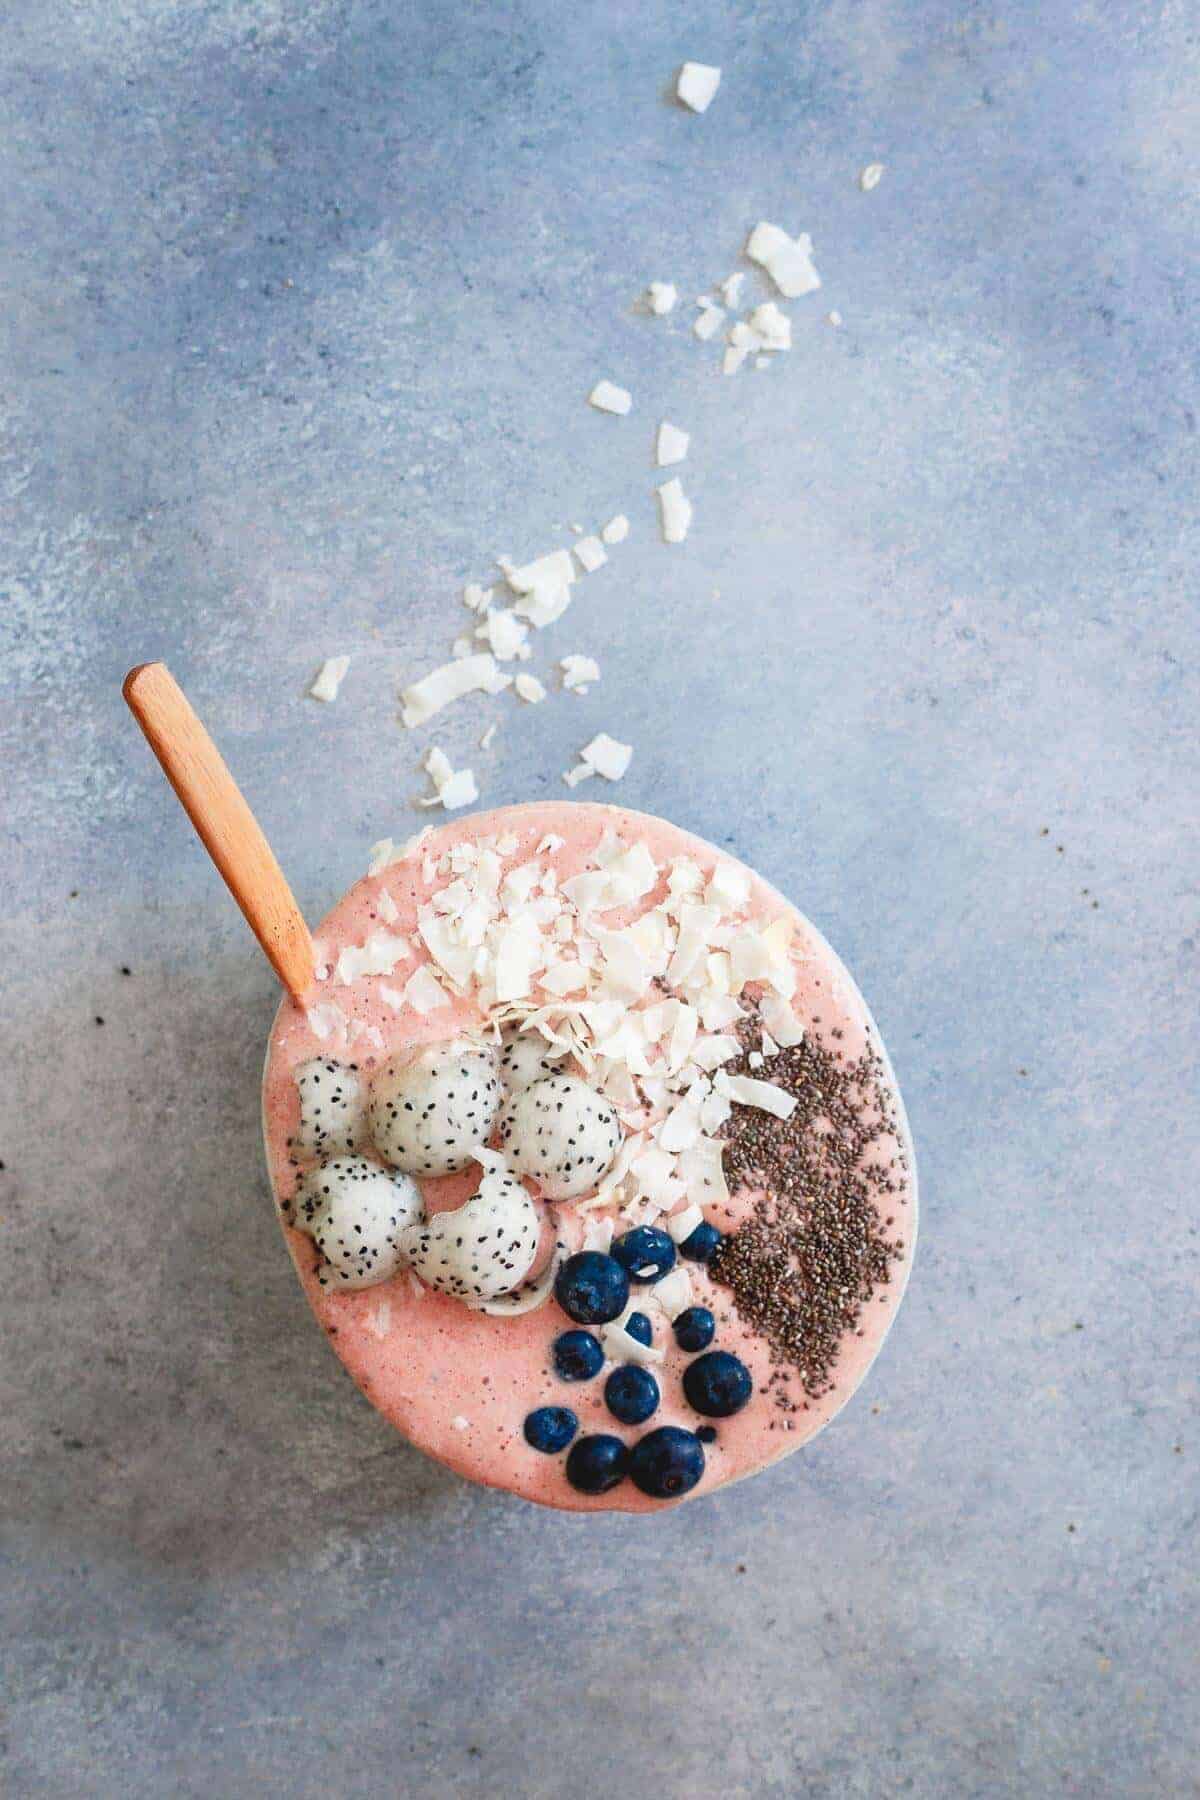 This cherry coconut recovery smoothie bowl is packed with anti-inflammatory tart cherries and hydrating coconut. Add your favorite toppings and enjoy post workout!